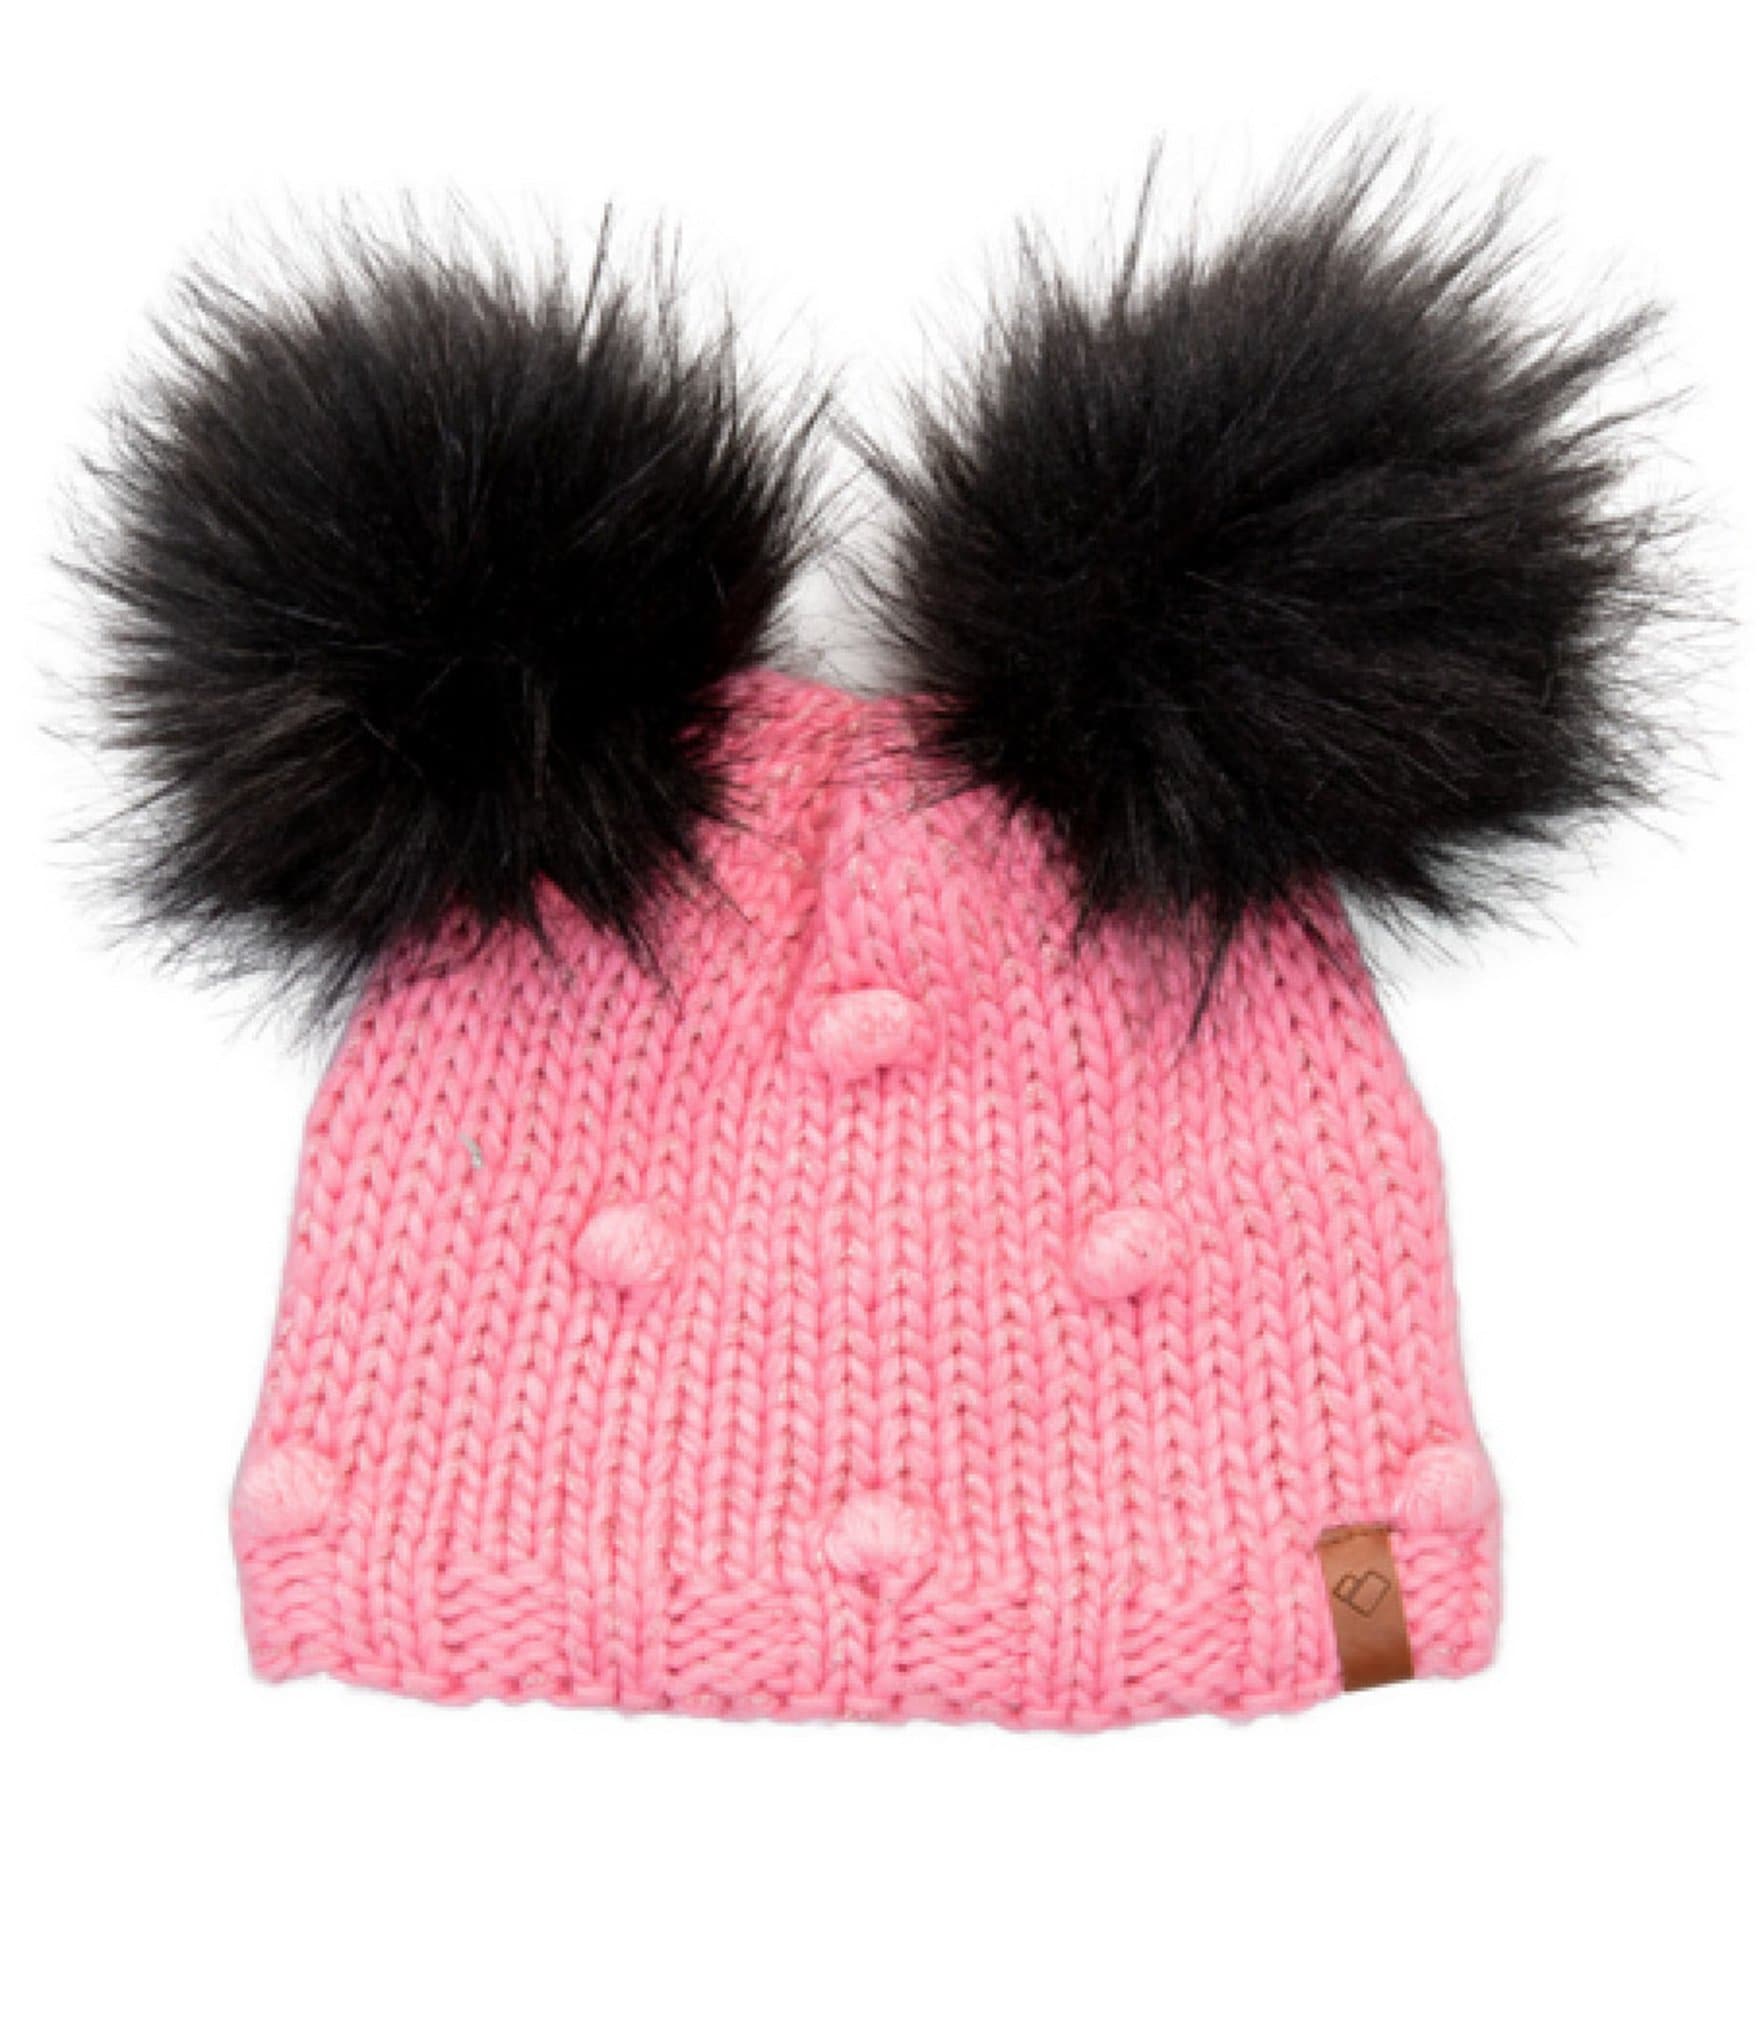 Aspen Kids Outfit Set Sweater Dress Tights Hat Scarf Girls 2T Pink